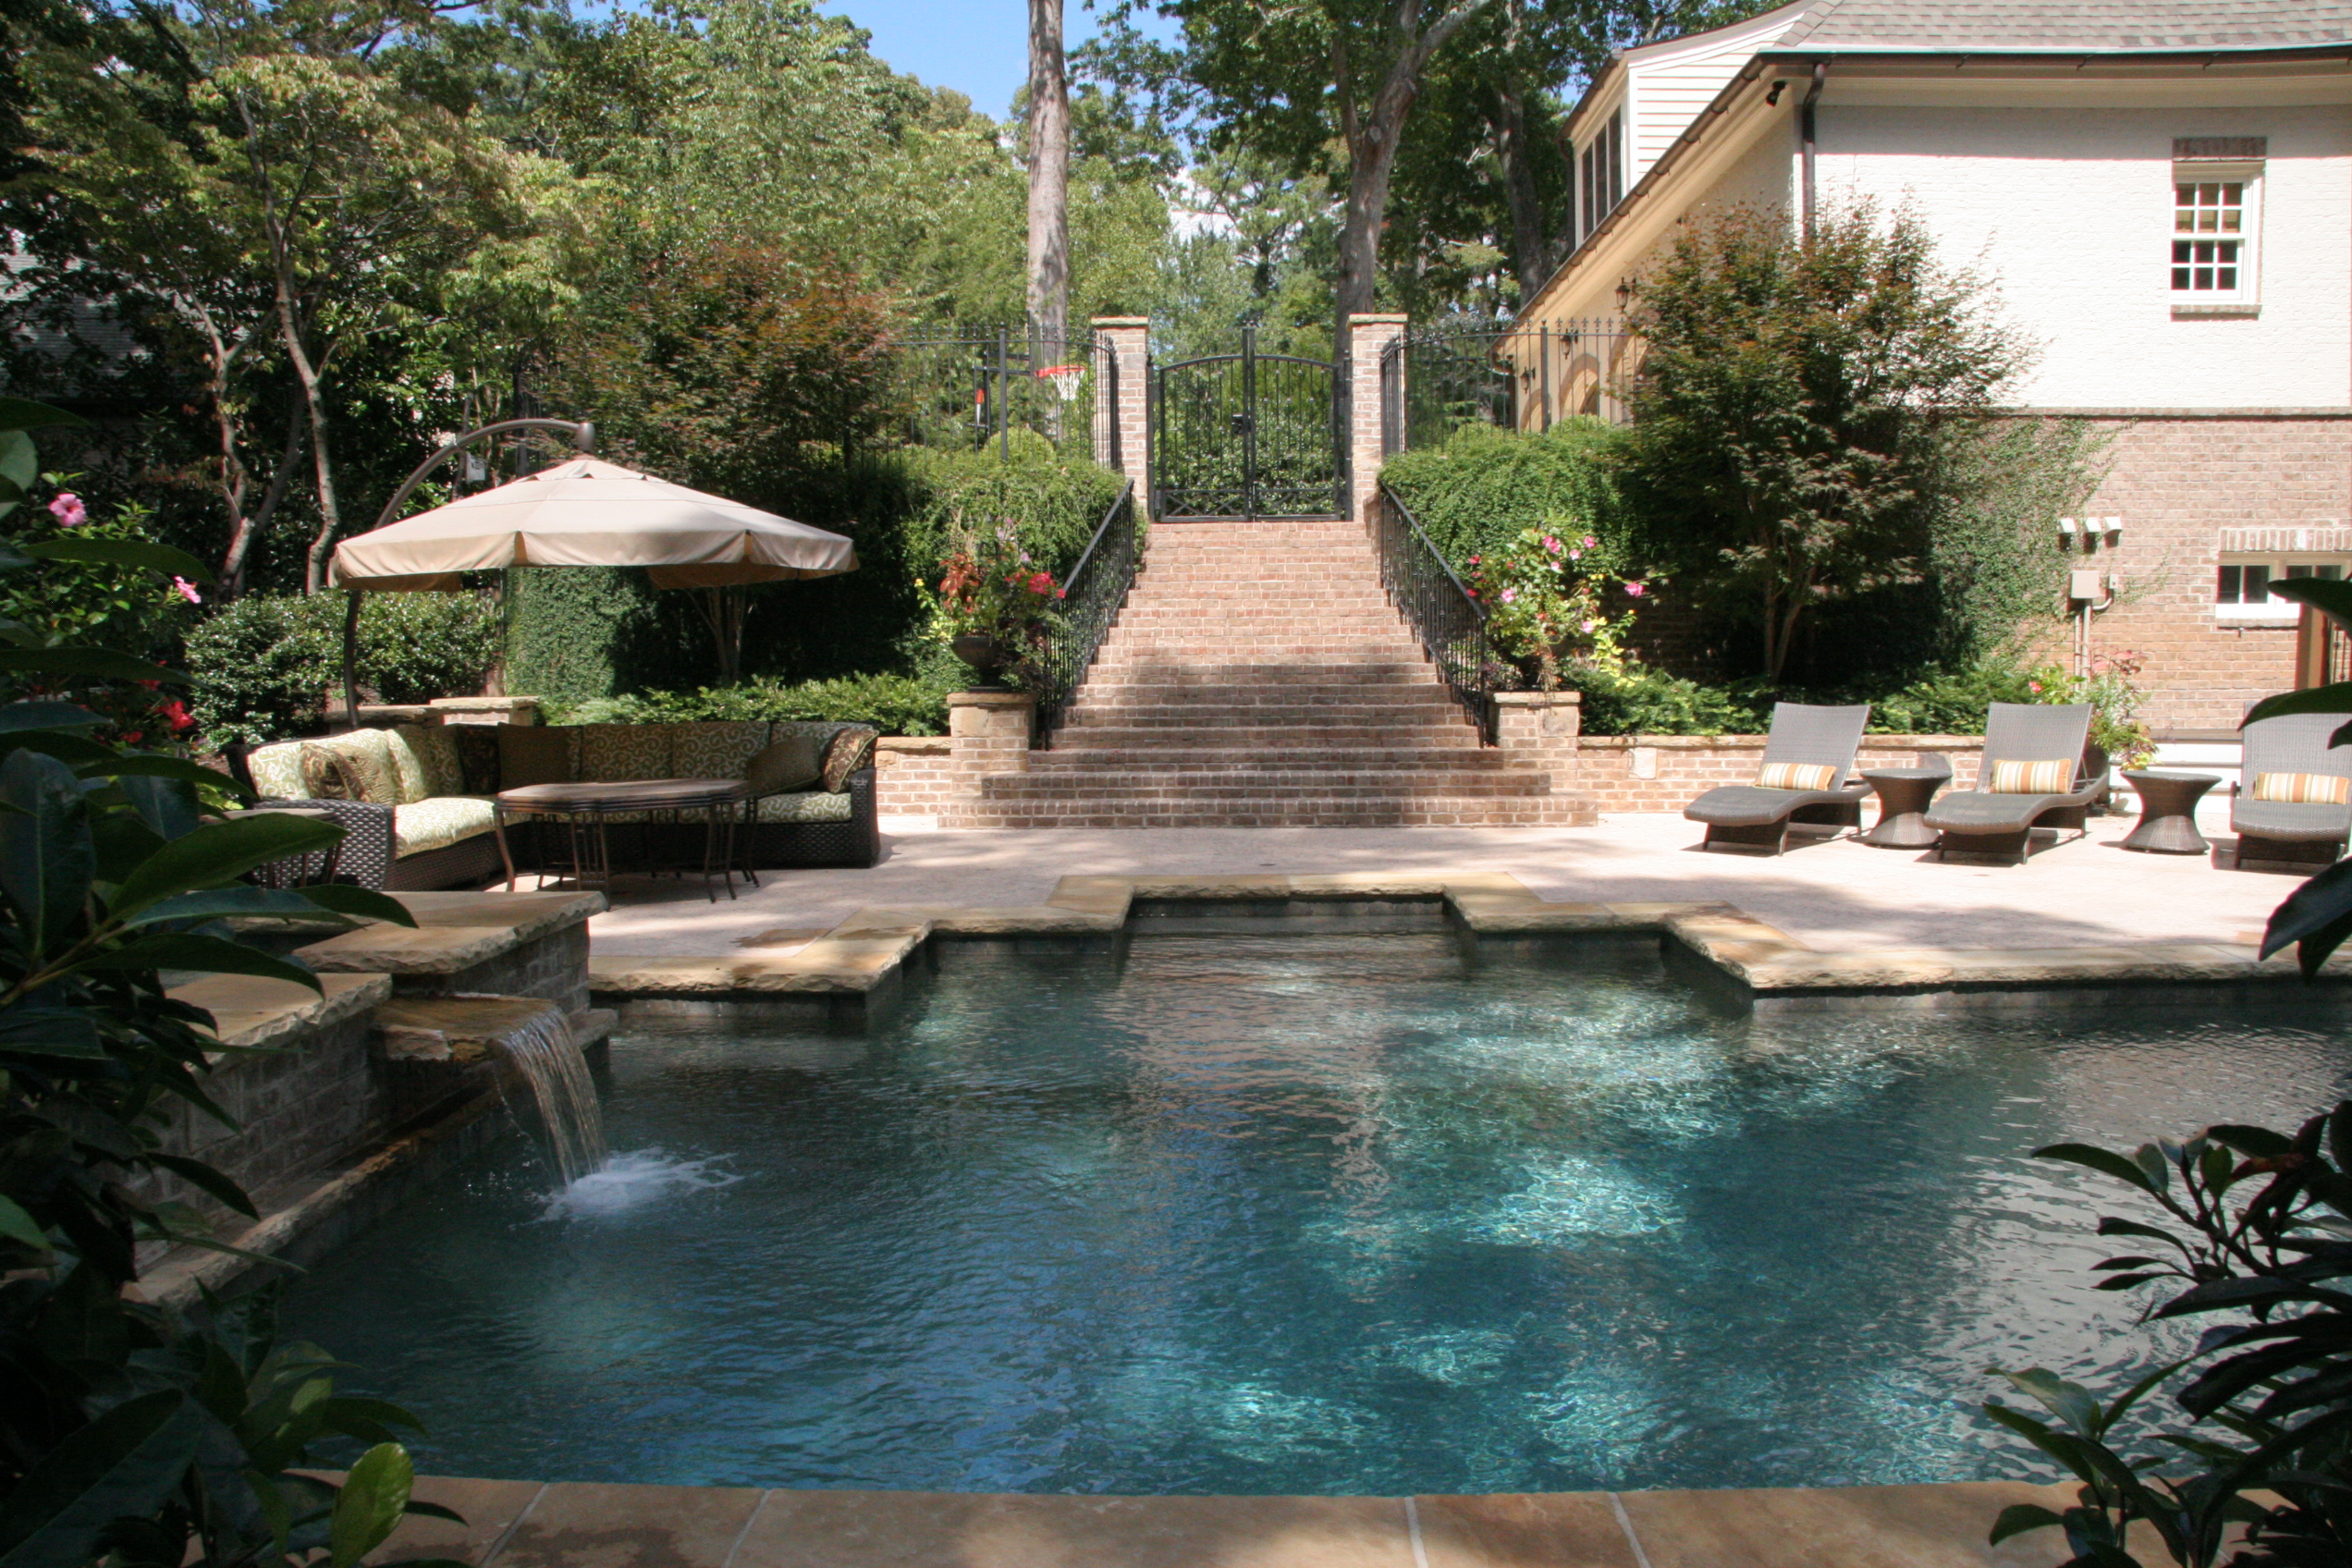 137 Dudley Court - Exterior Pool